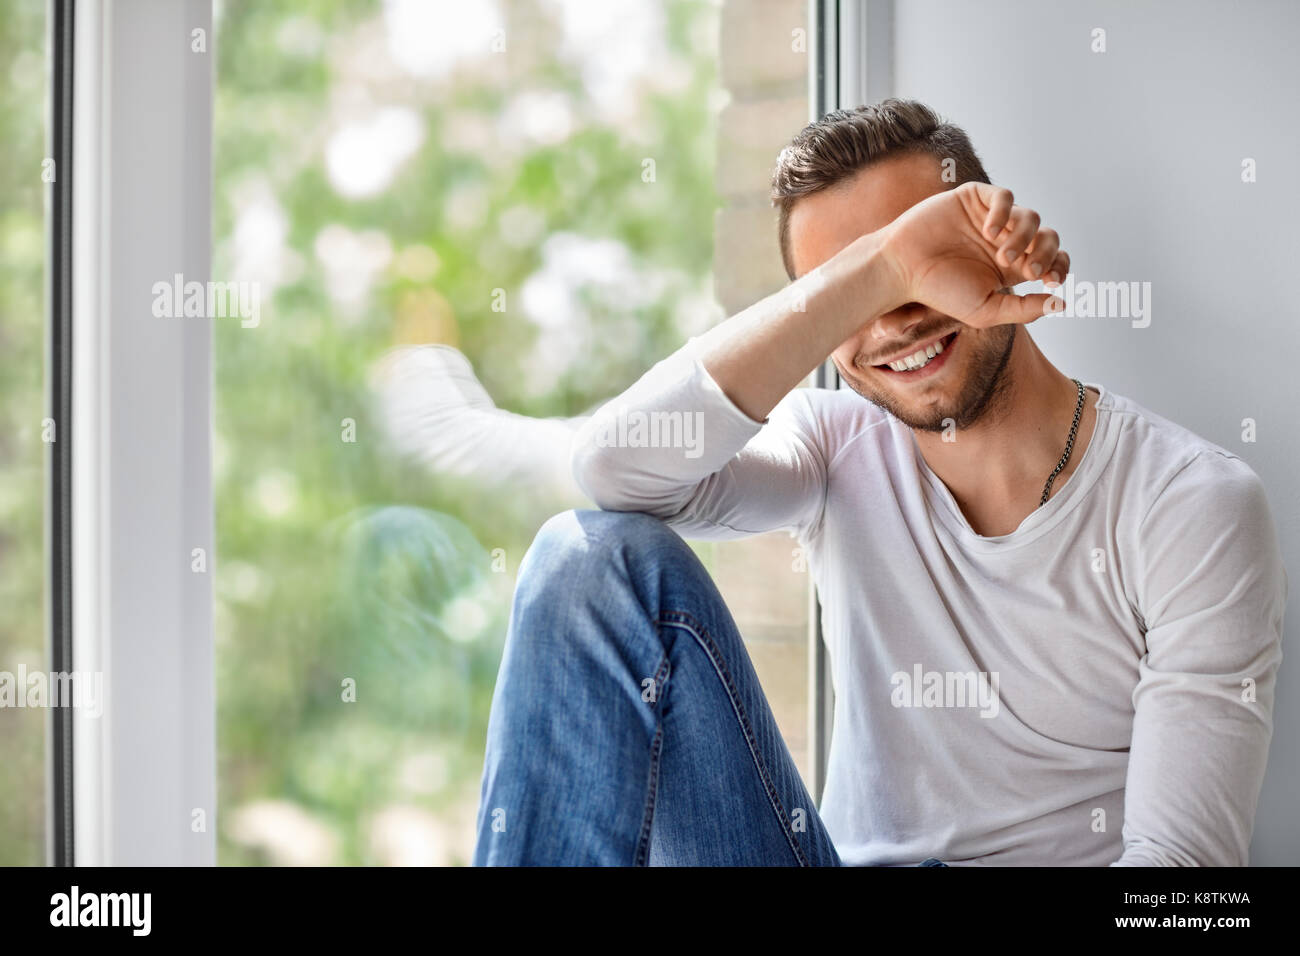 Smiling shy man close face with hand sitting on window sill Stock Photo